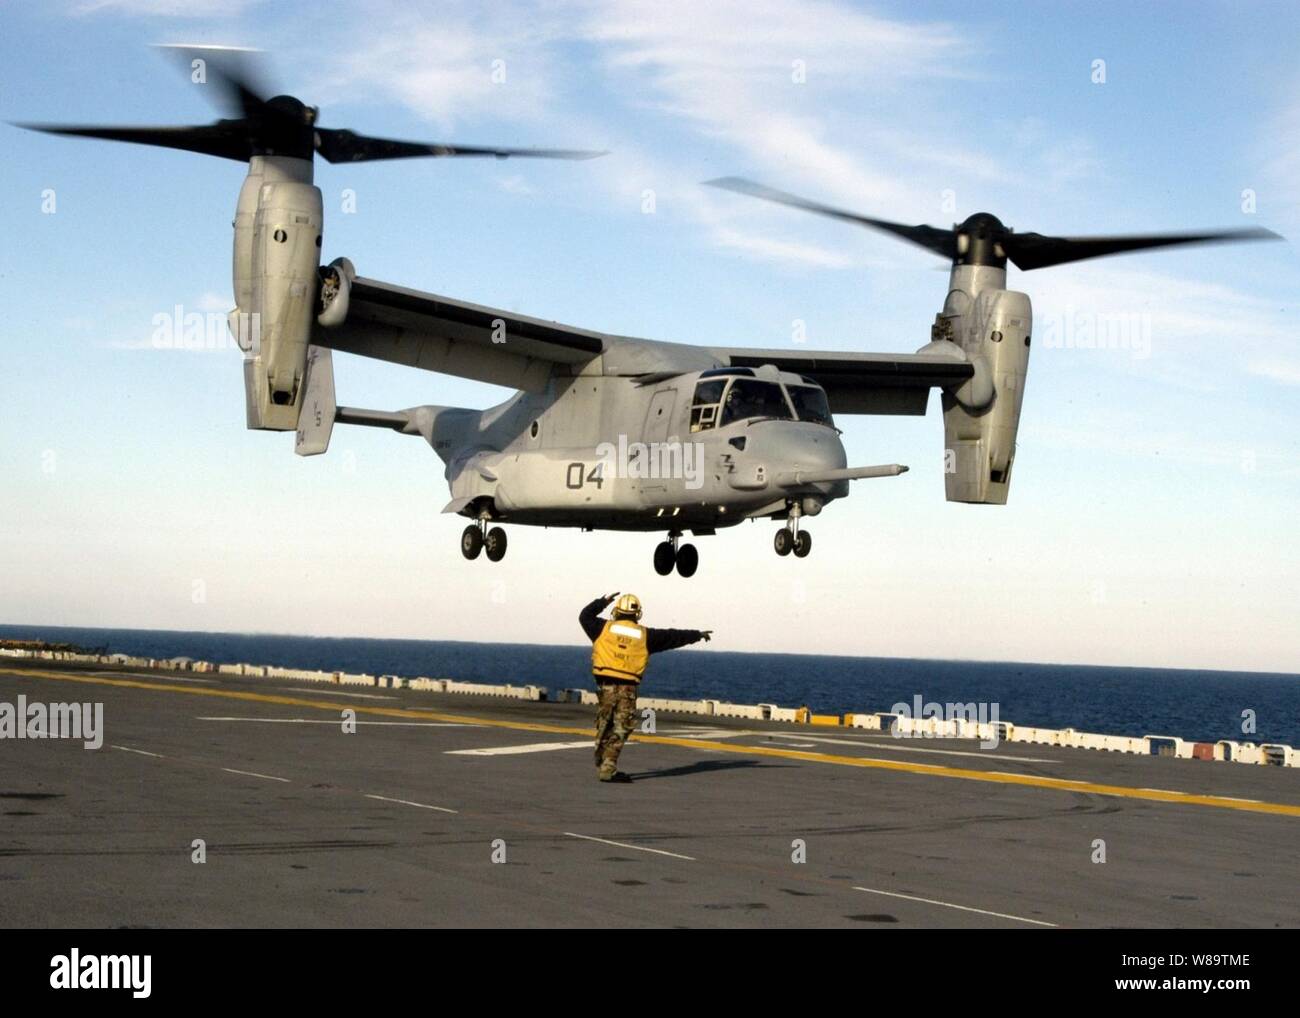 A flight deck crewman directs the crew of a U.S. Marine Corps CV-22 Osprey tilt rotor aircraft as they practice touch and go landings on the flight deck of the USS Wasp (LHD 1) as the ship operates in the Atlantic Ocean on Dec. 6, 2006.  The Osprey is from Marine Medium Tiltrotor Squadron 162 and is working on deck landing qualifications. Stock Photo